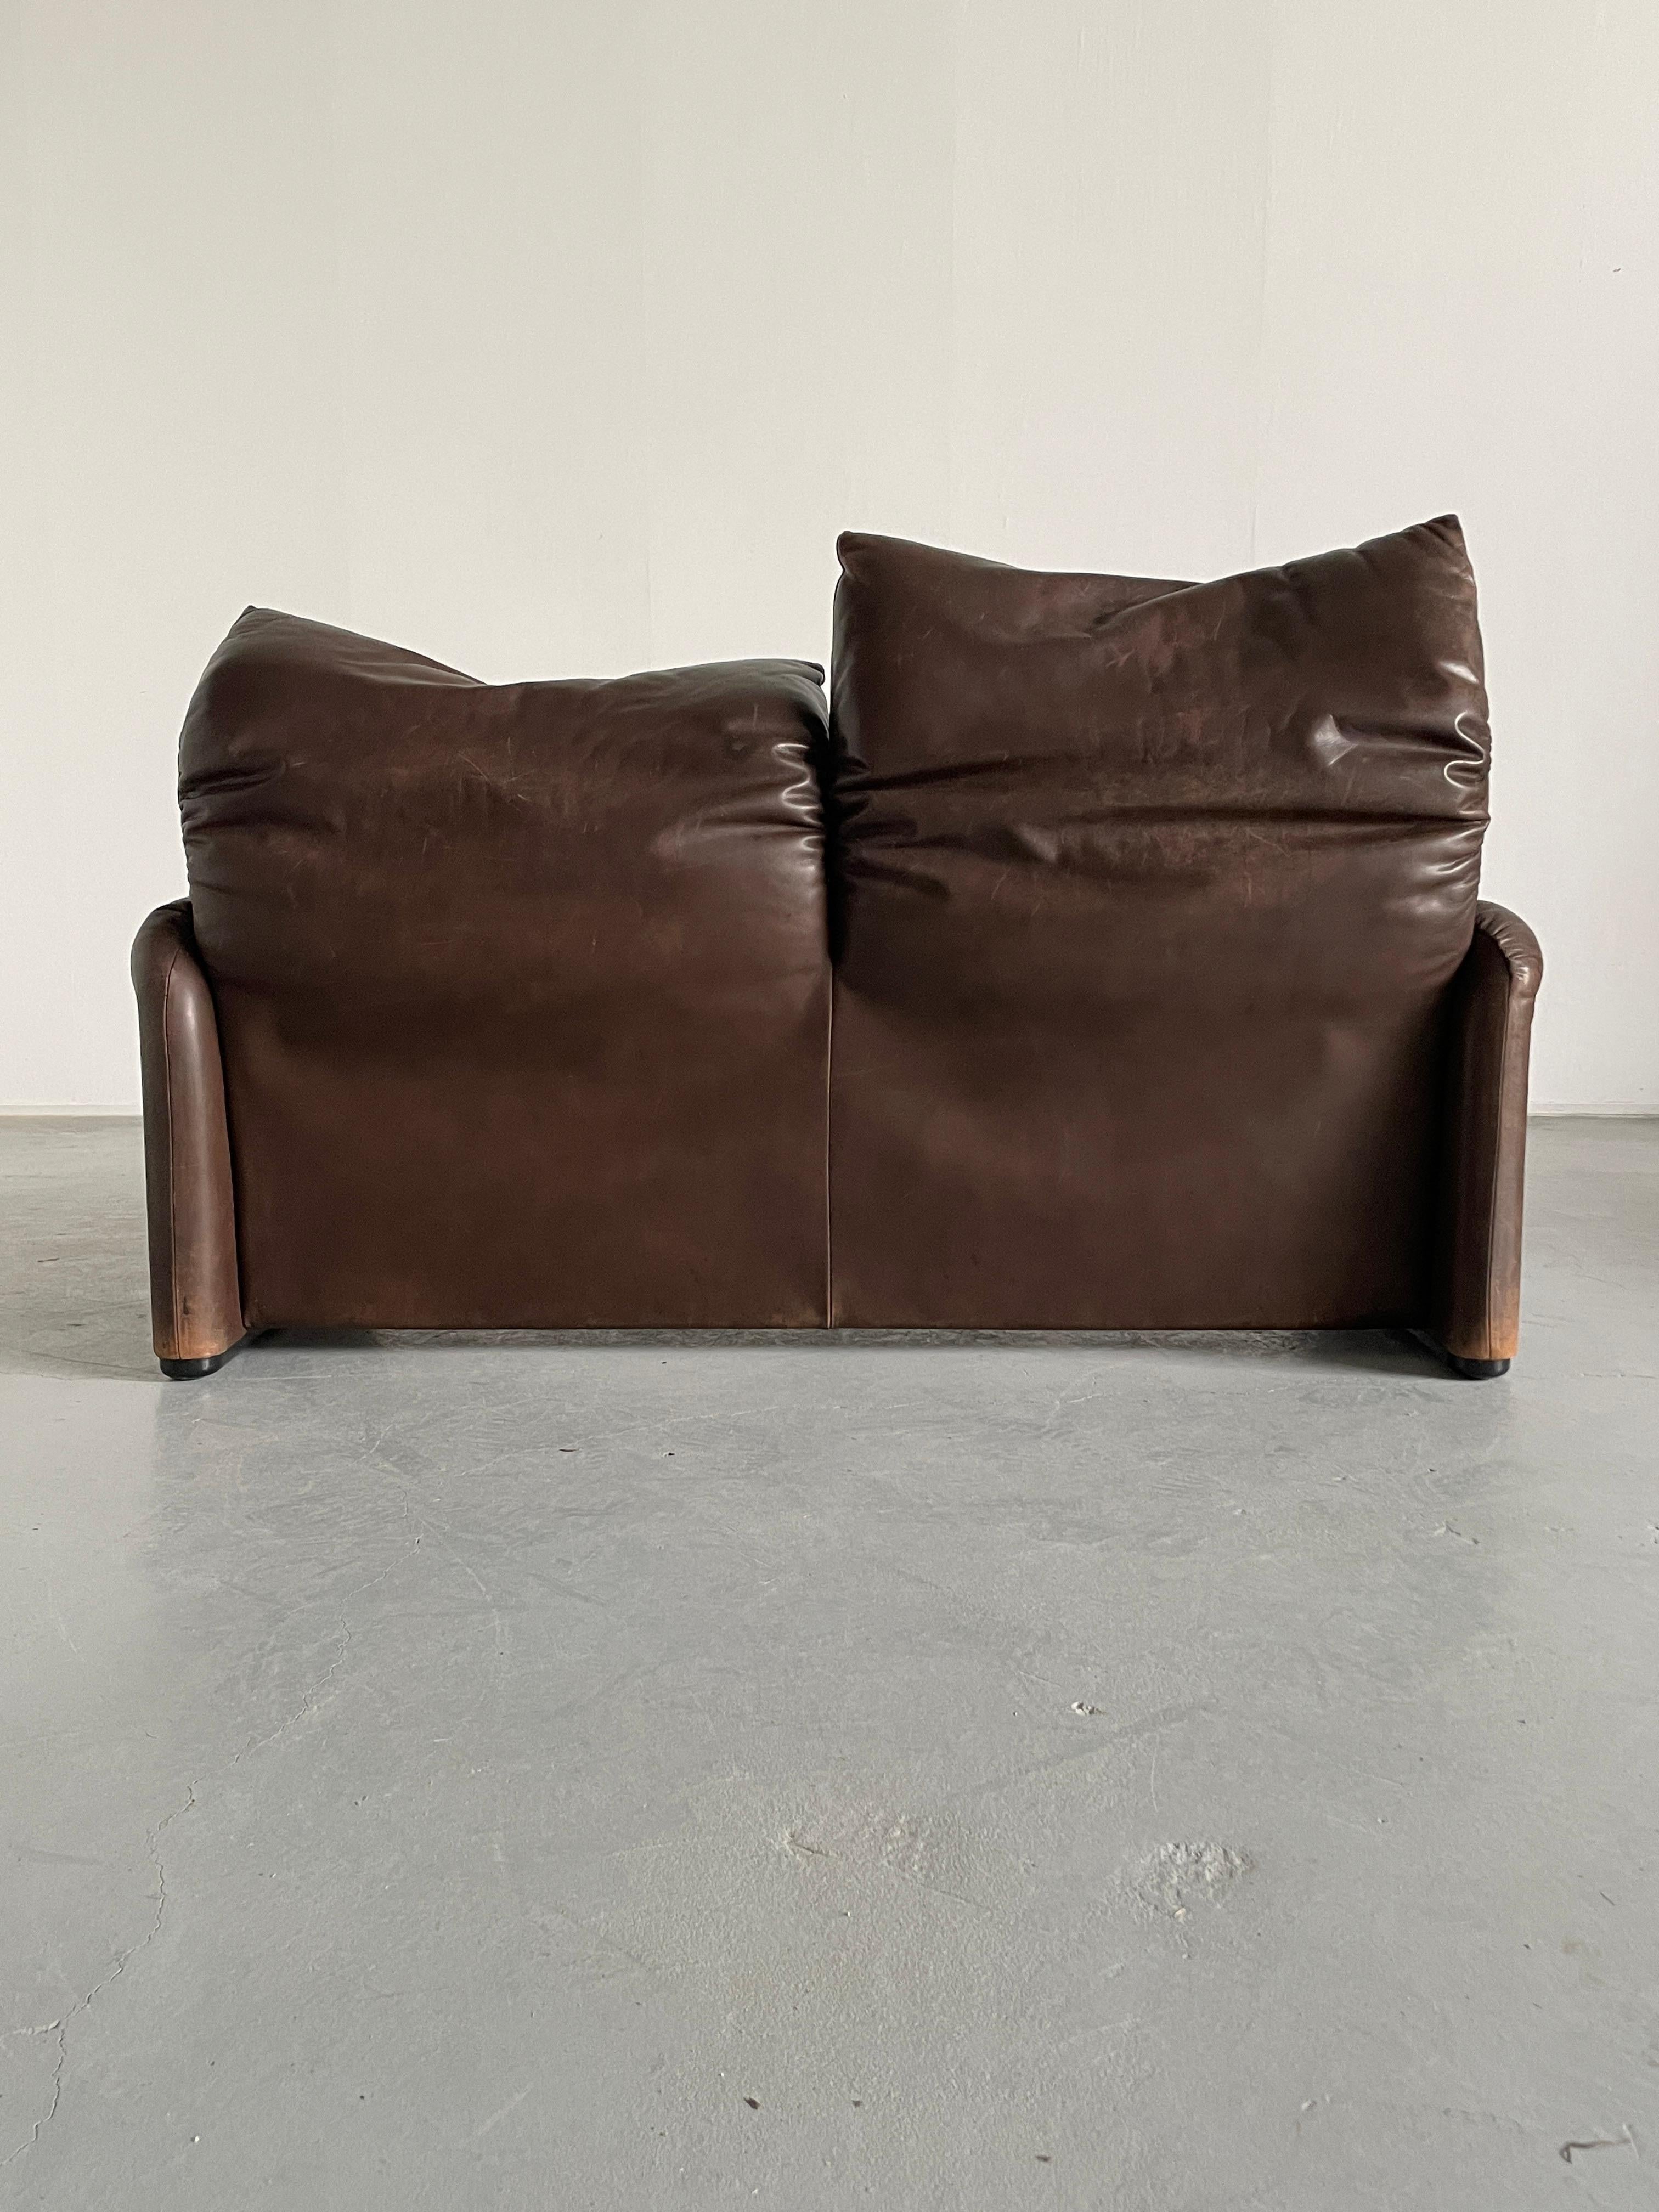 Leather Vintage 'Maralunga' Two-seater Sofa by Vico Magistretti for Cassina, 1970s